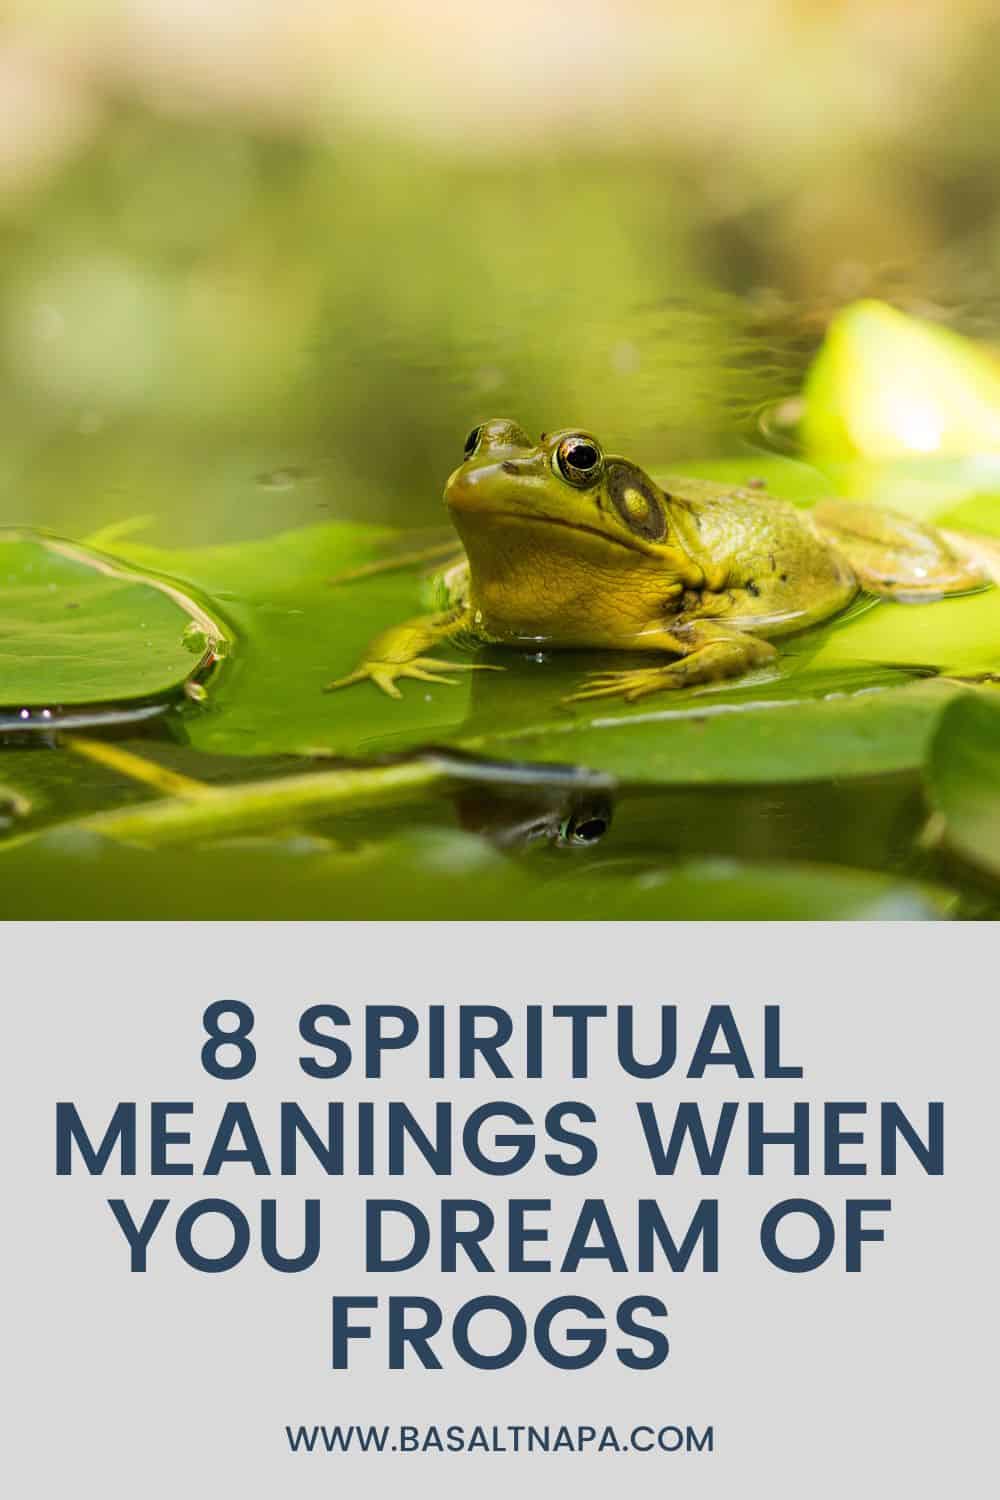 8 Spiritual Meanings When You Dream Of Frogs